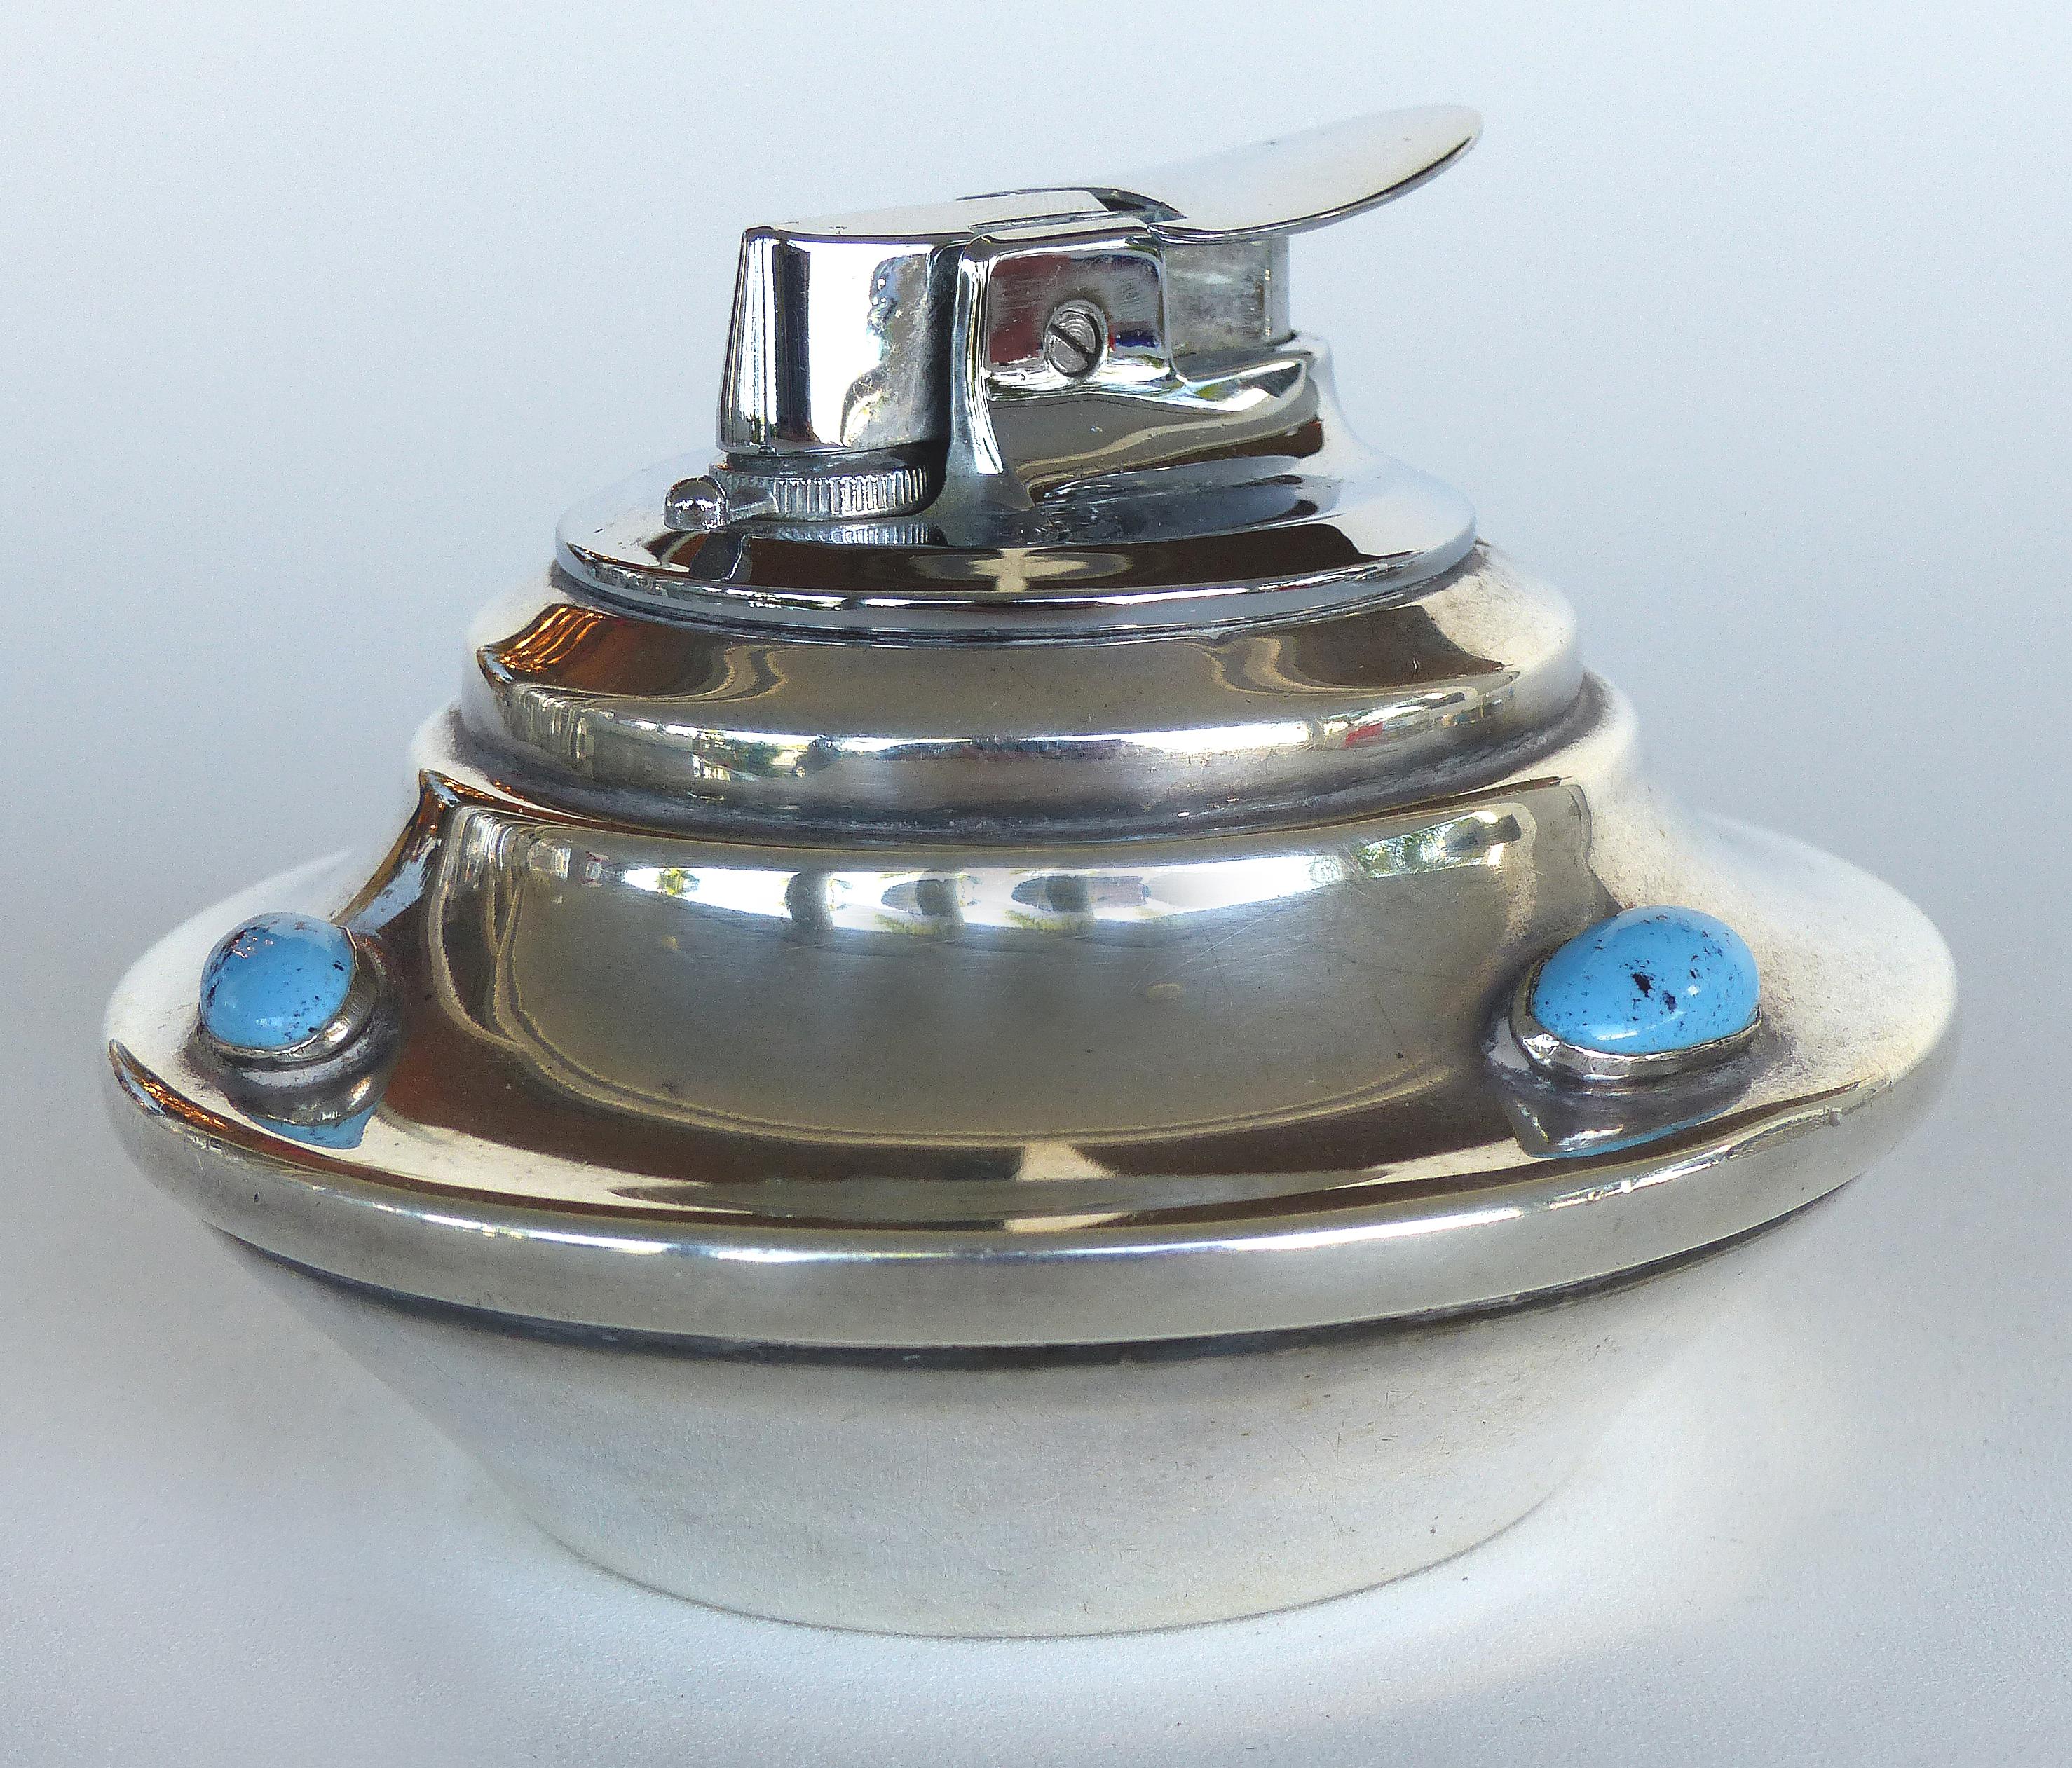 Offered for sale is a Mid-century Modern silverplate smoking set including a lighter and ashtray embellished by inset turquoise stones. The set has an Art Deco style form. Measurements given below are for the lighter; Ashtray measures 5